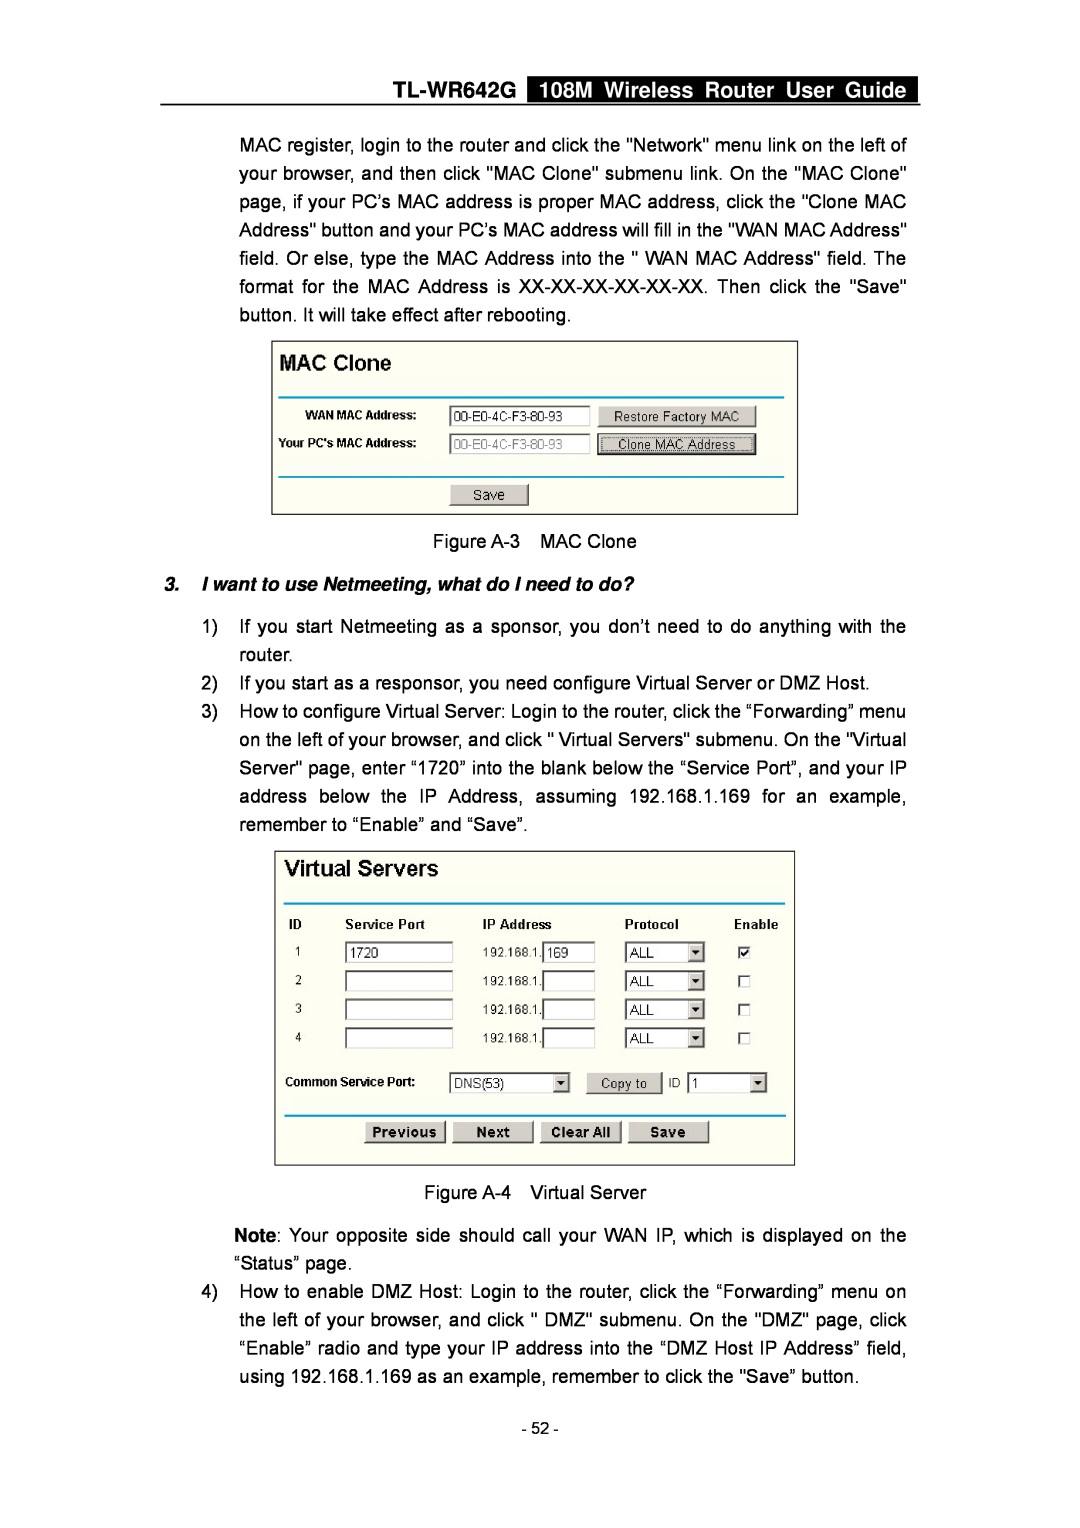 TP-Link manual I want to use Netmeeting, what do I need to do?, TL-WR642G 108M Wireless Router User Guide 